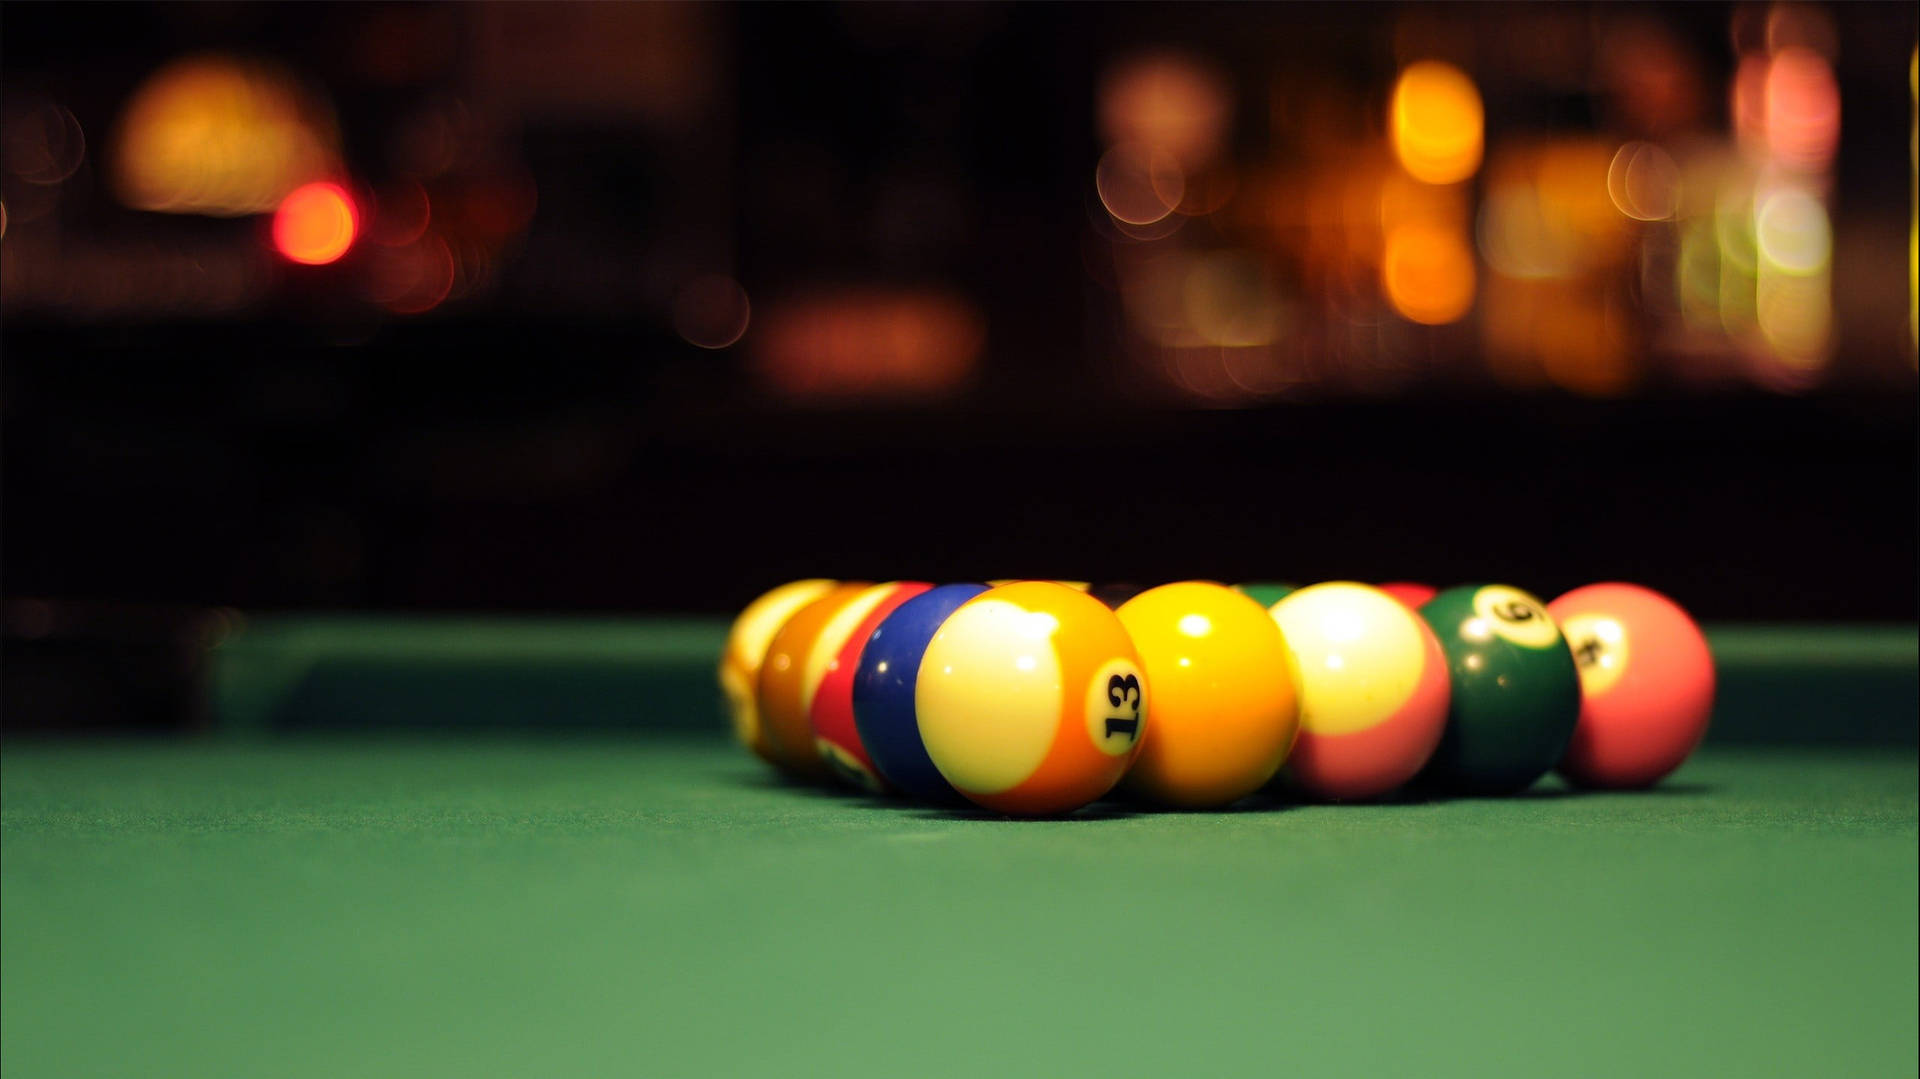 Caption: Perfect Lineup - Precision in Putting Snooker Balls Wallpaper